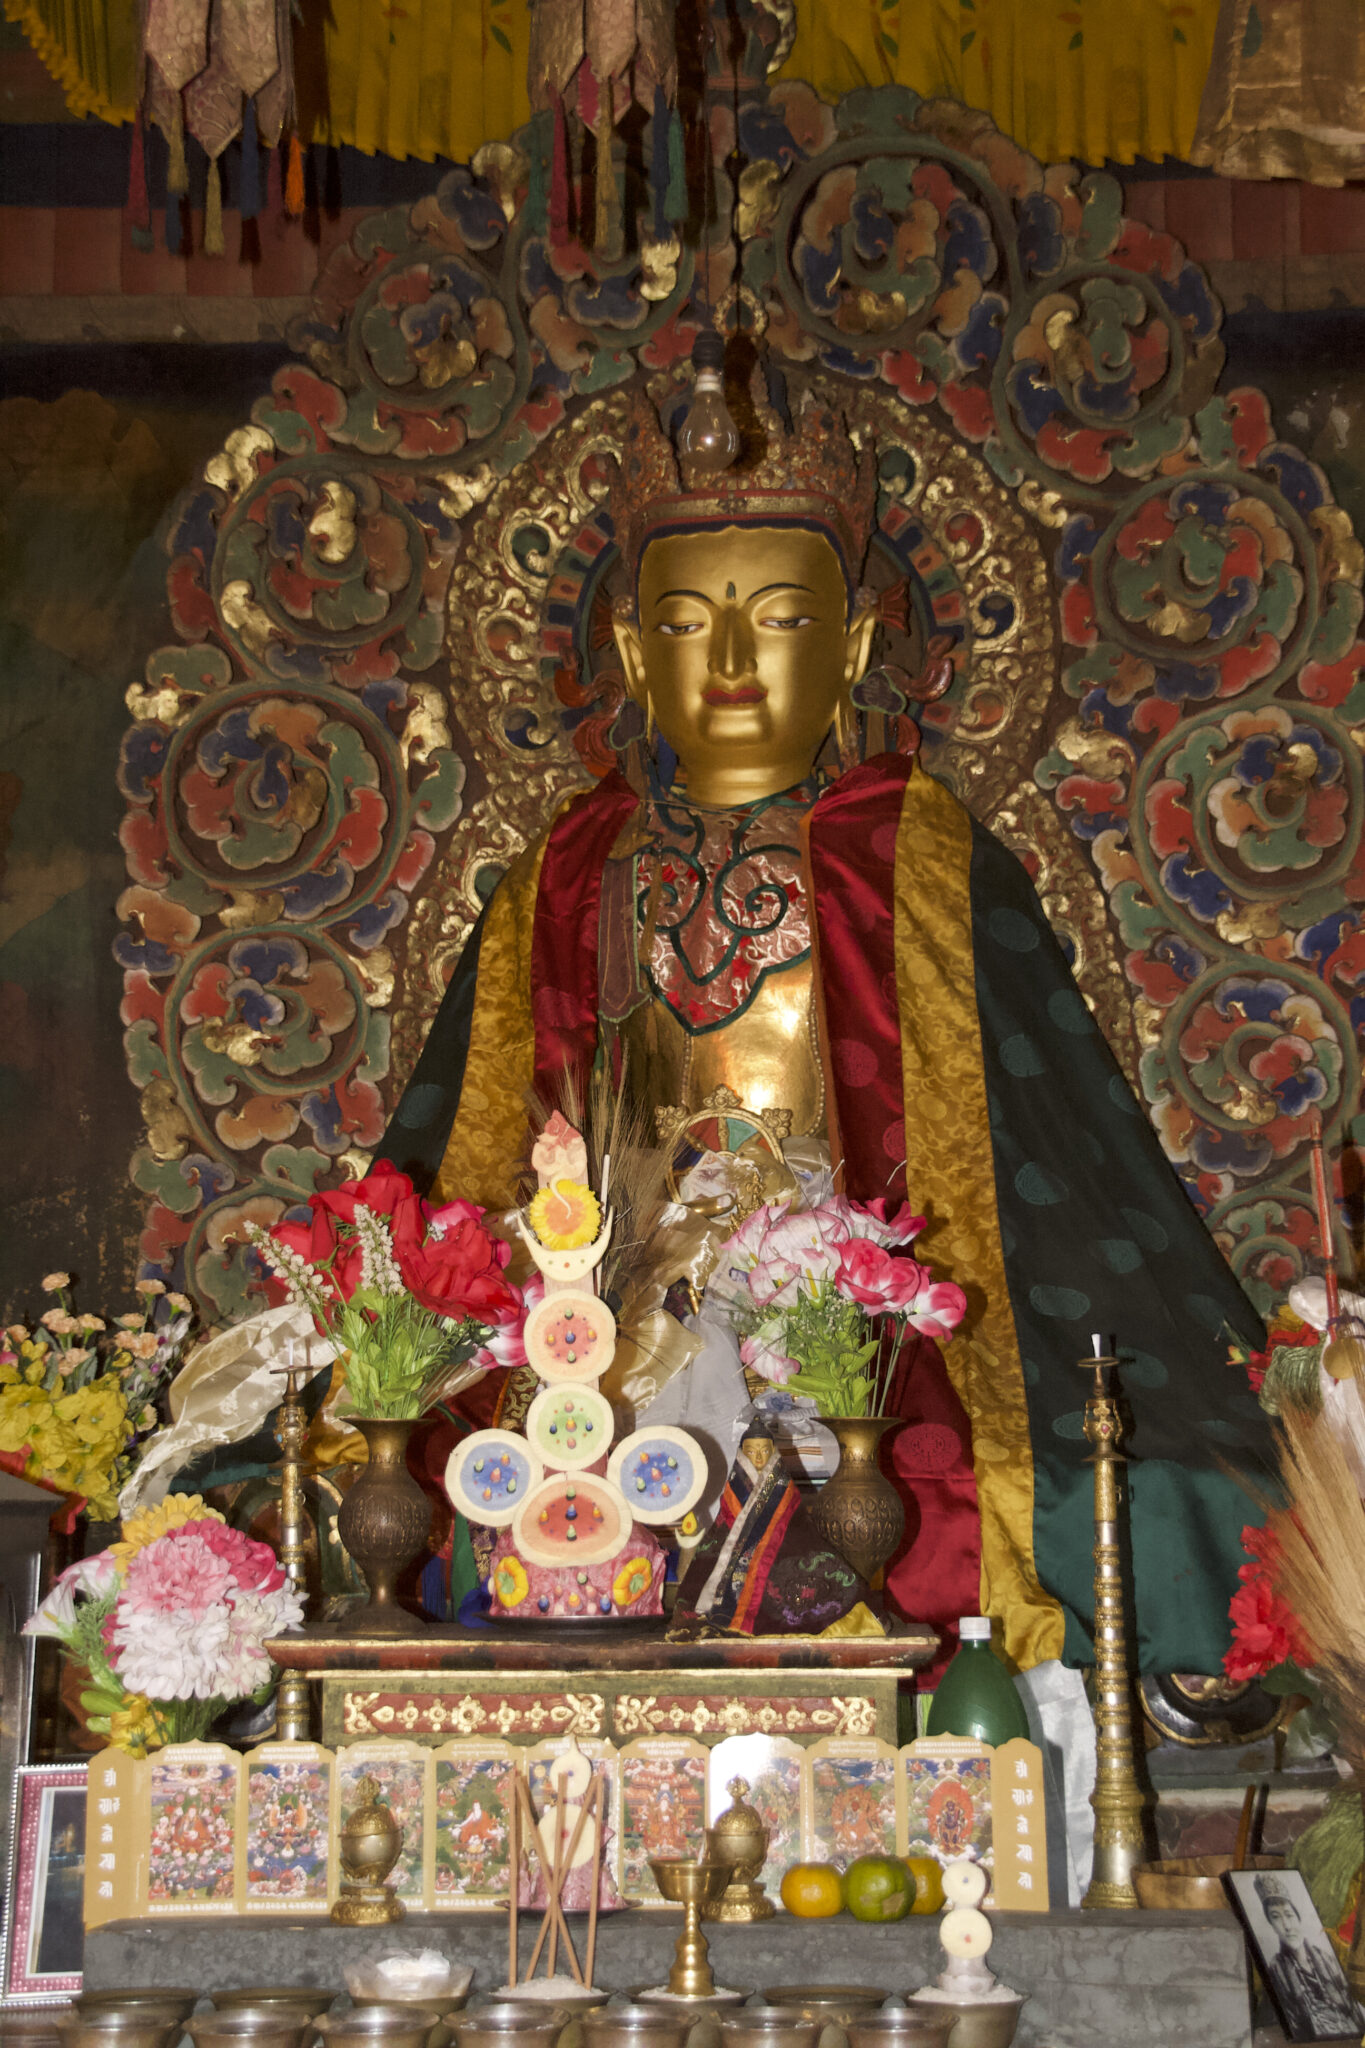 Golden Buddha dressed in green, saffron, and red cape seated between altar and colorful mandorla